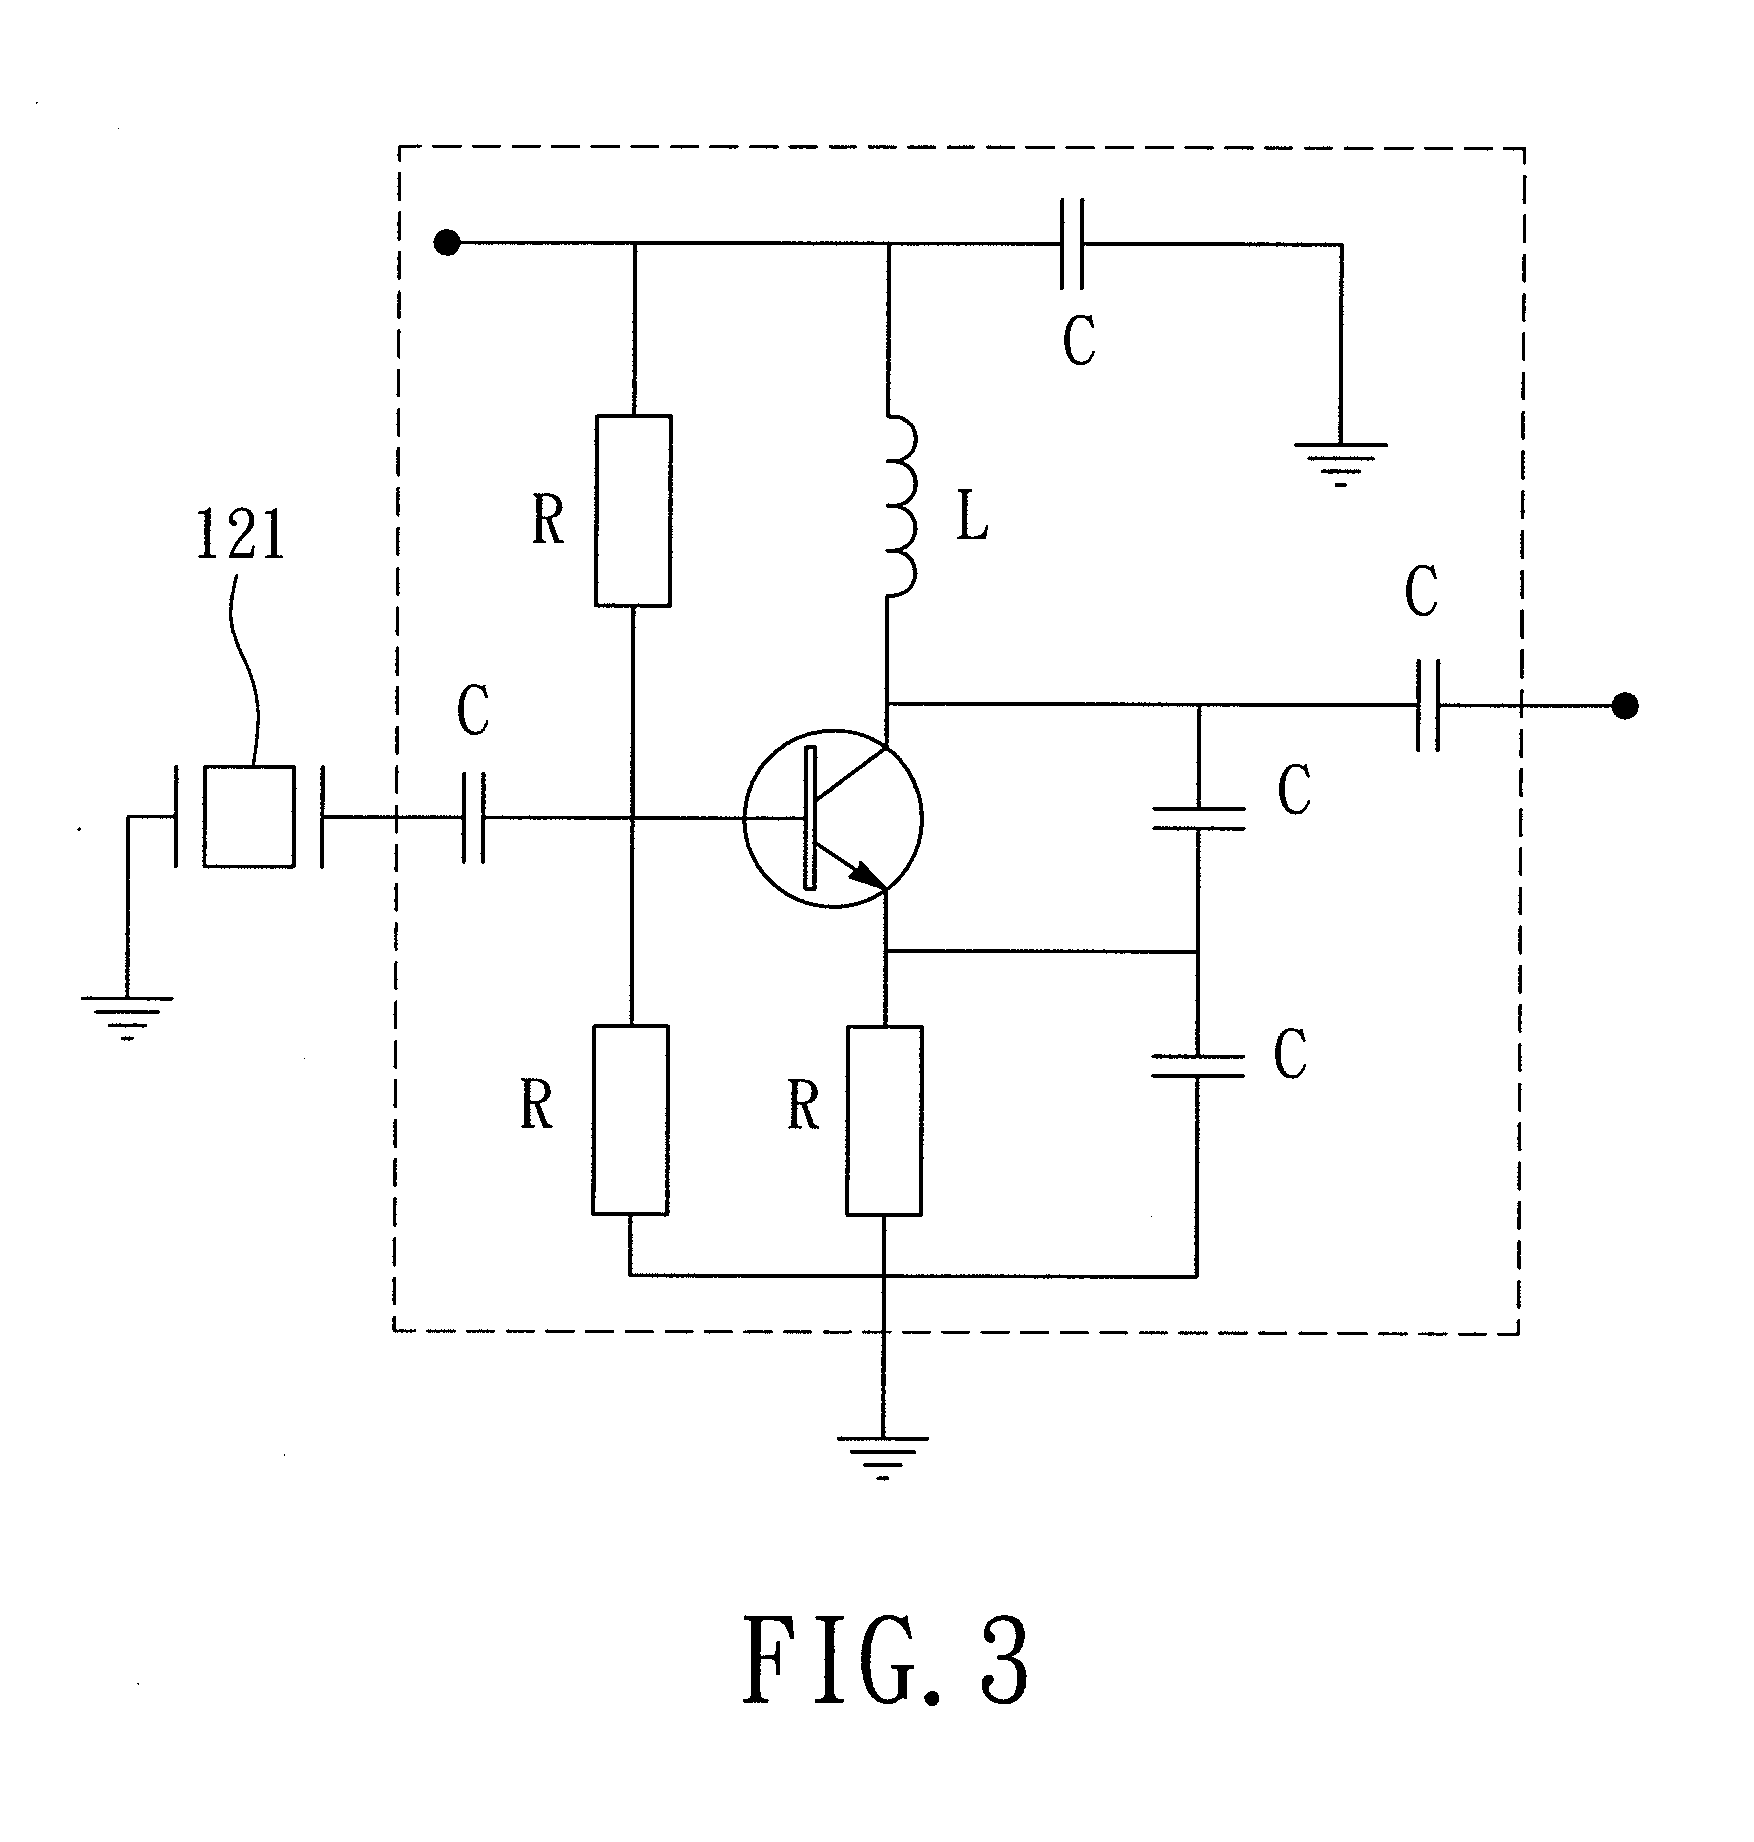 System and Method for Determining Concentration of a Predetermined Osteoarthritis Biomarker in a Urine Sample